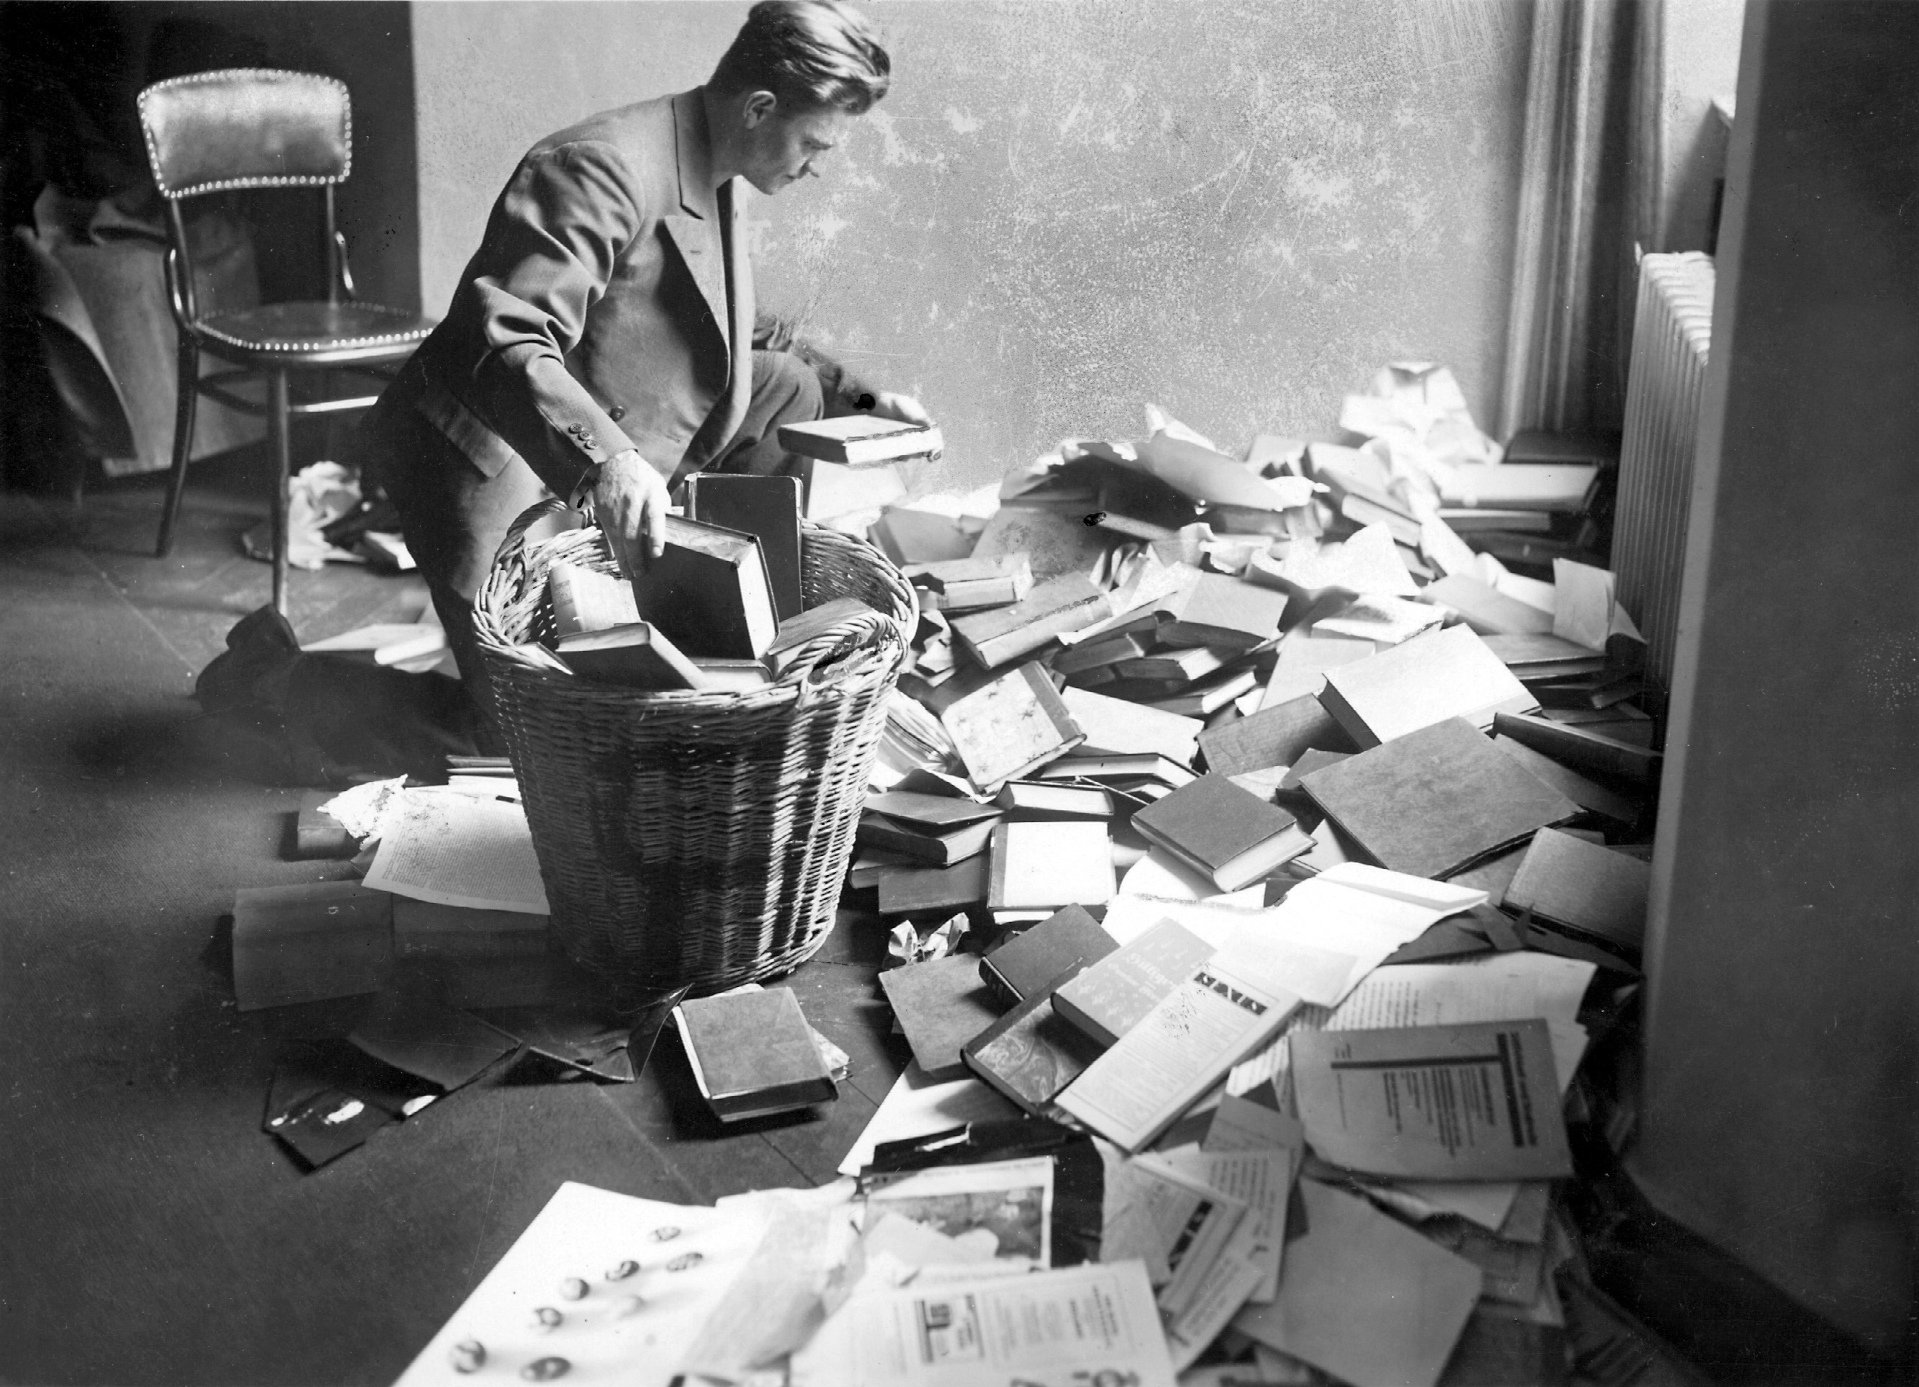 A student standing in a room in front of a pile of books and writings that have been thrown on the floor. He is picking them up and throwing them into a large trash basket.